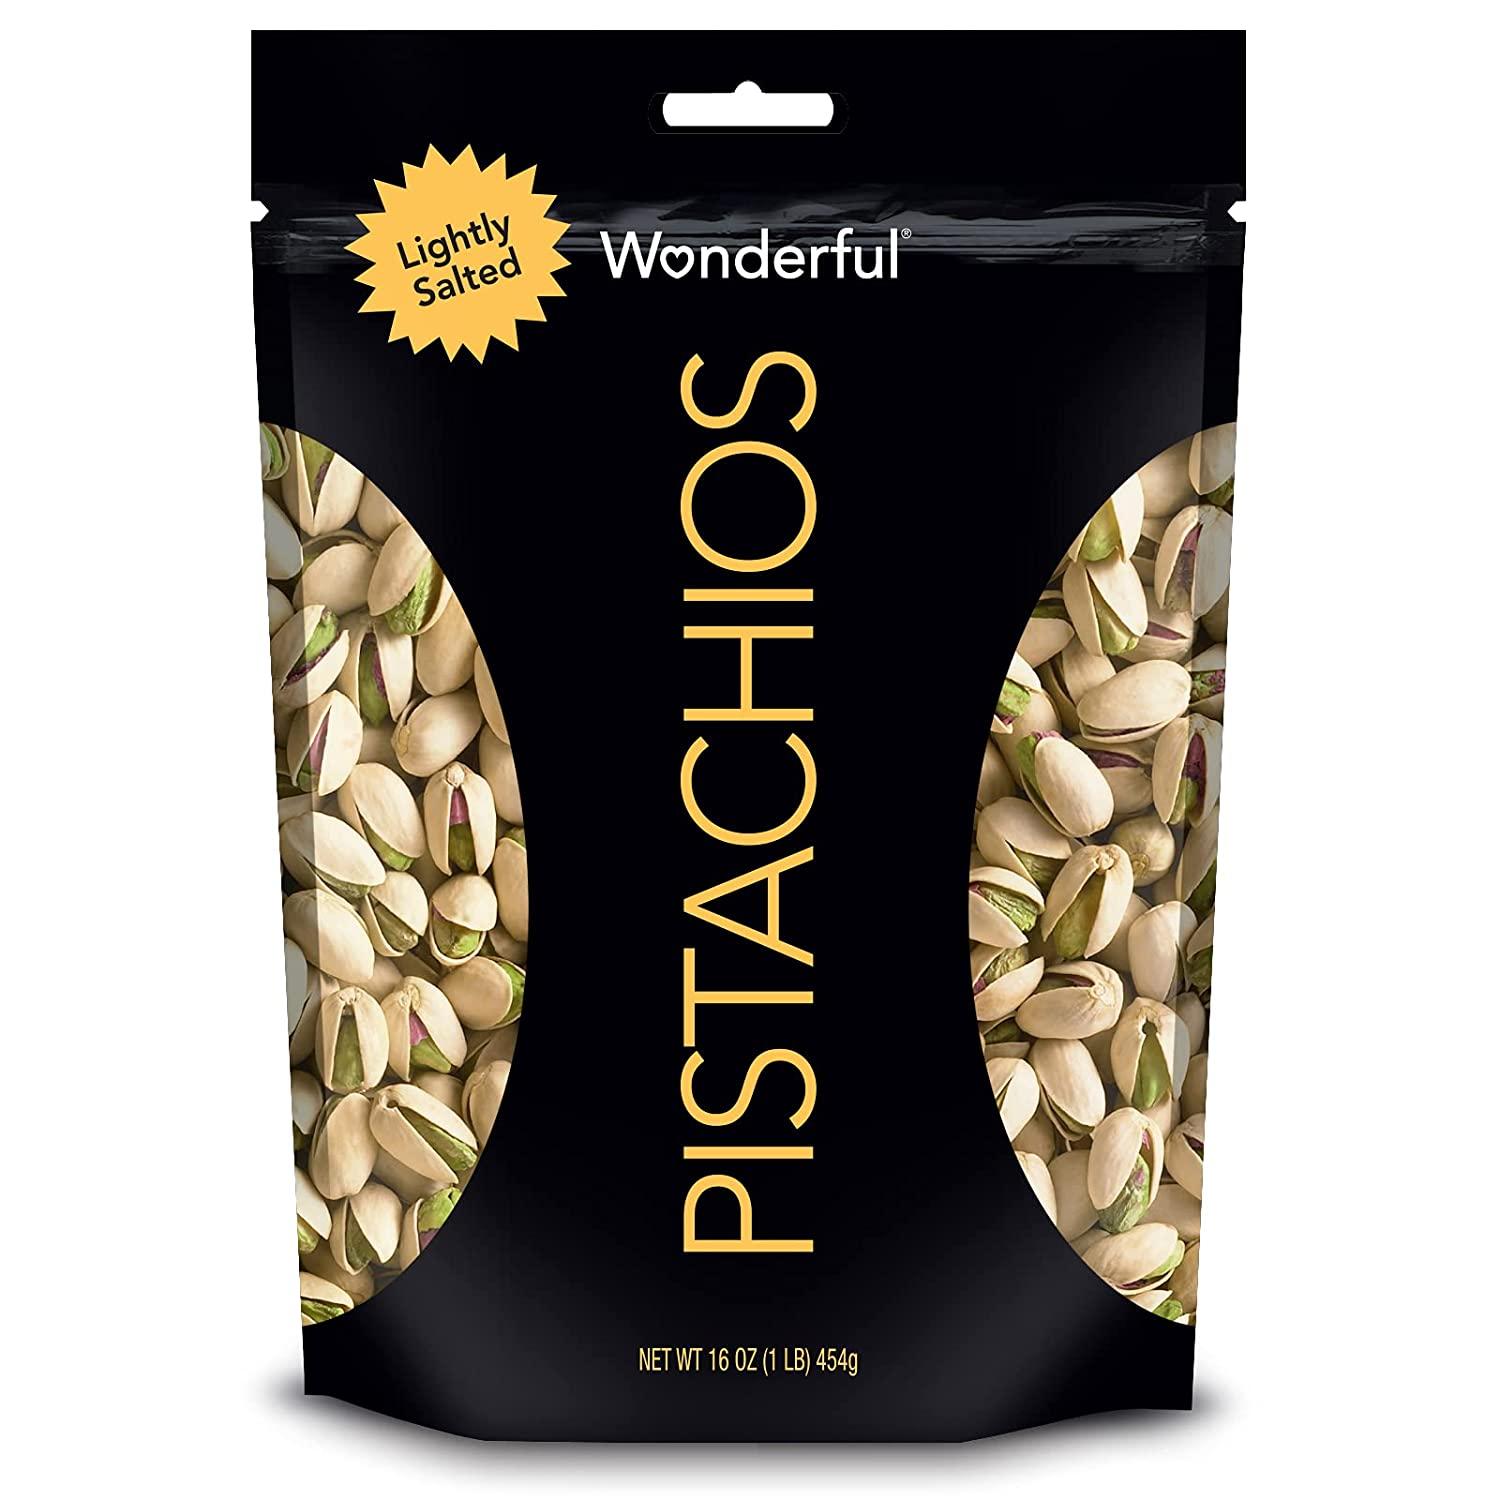 16oz Wonderful Pistachios Lightly Salted  for $5.69 Shipped